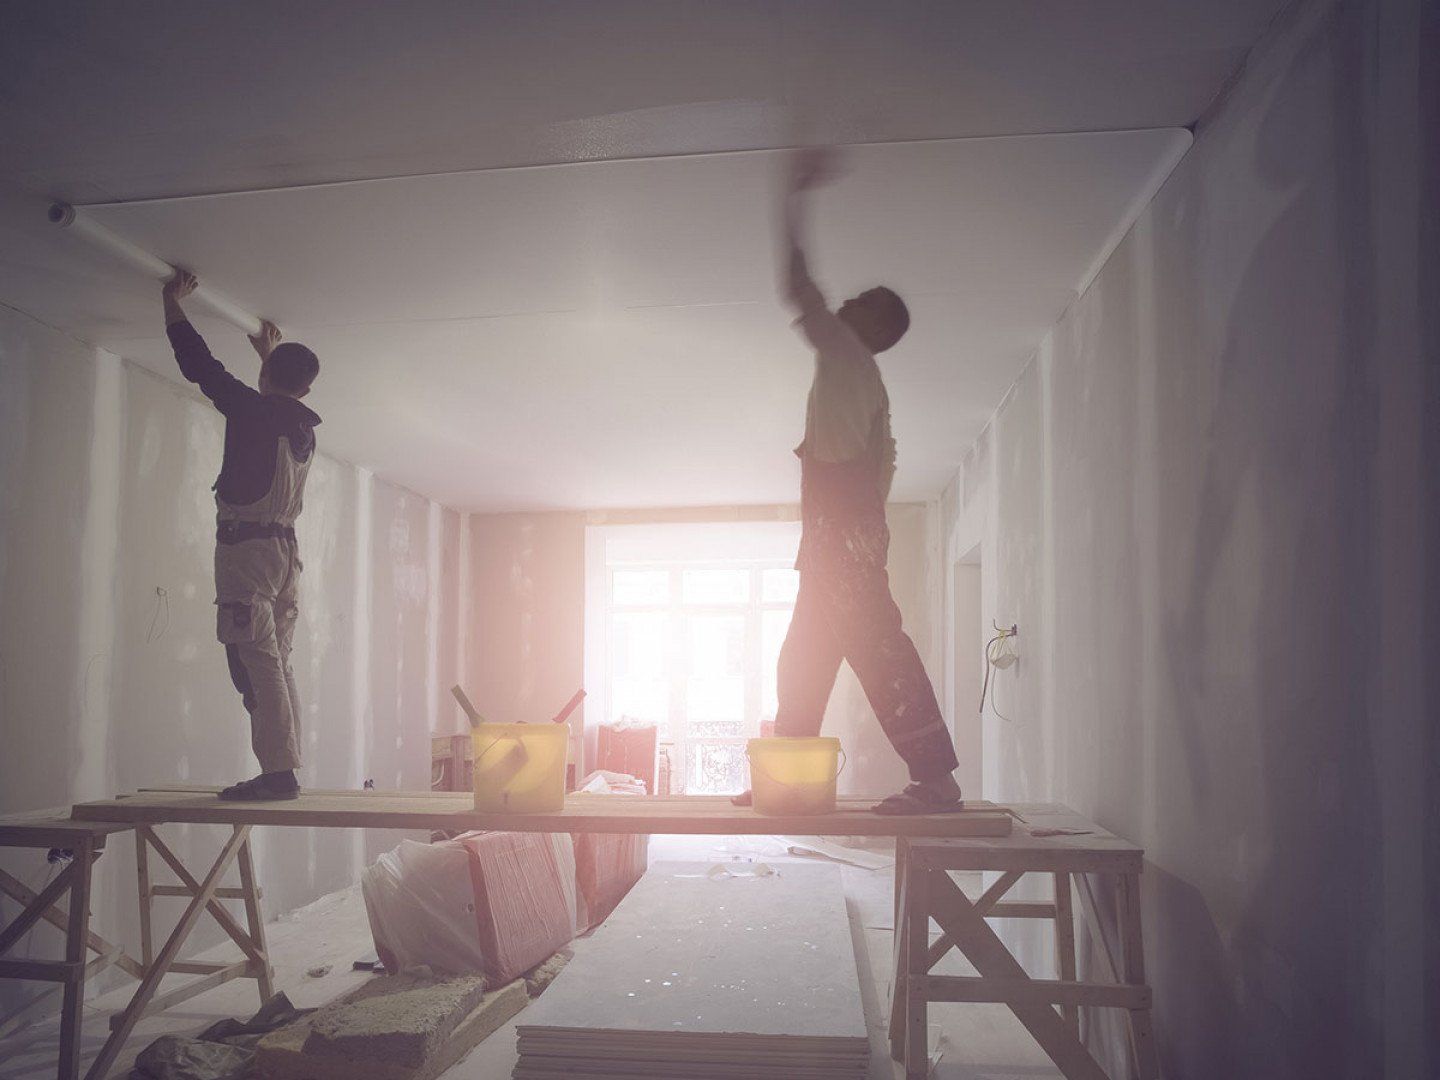 2 men painting the ceiling